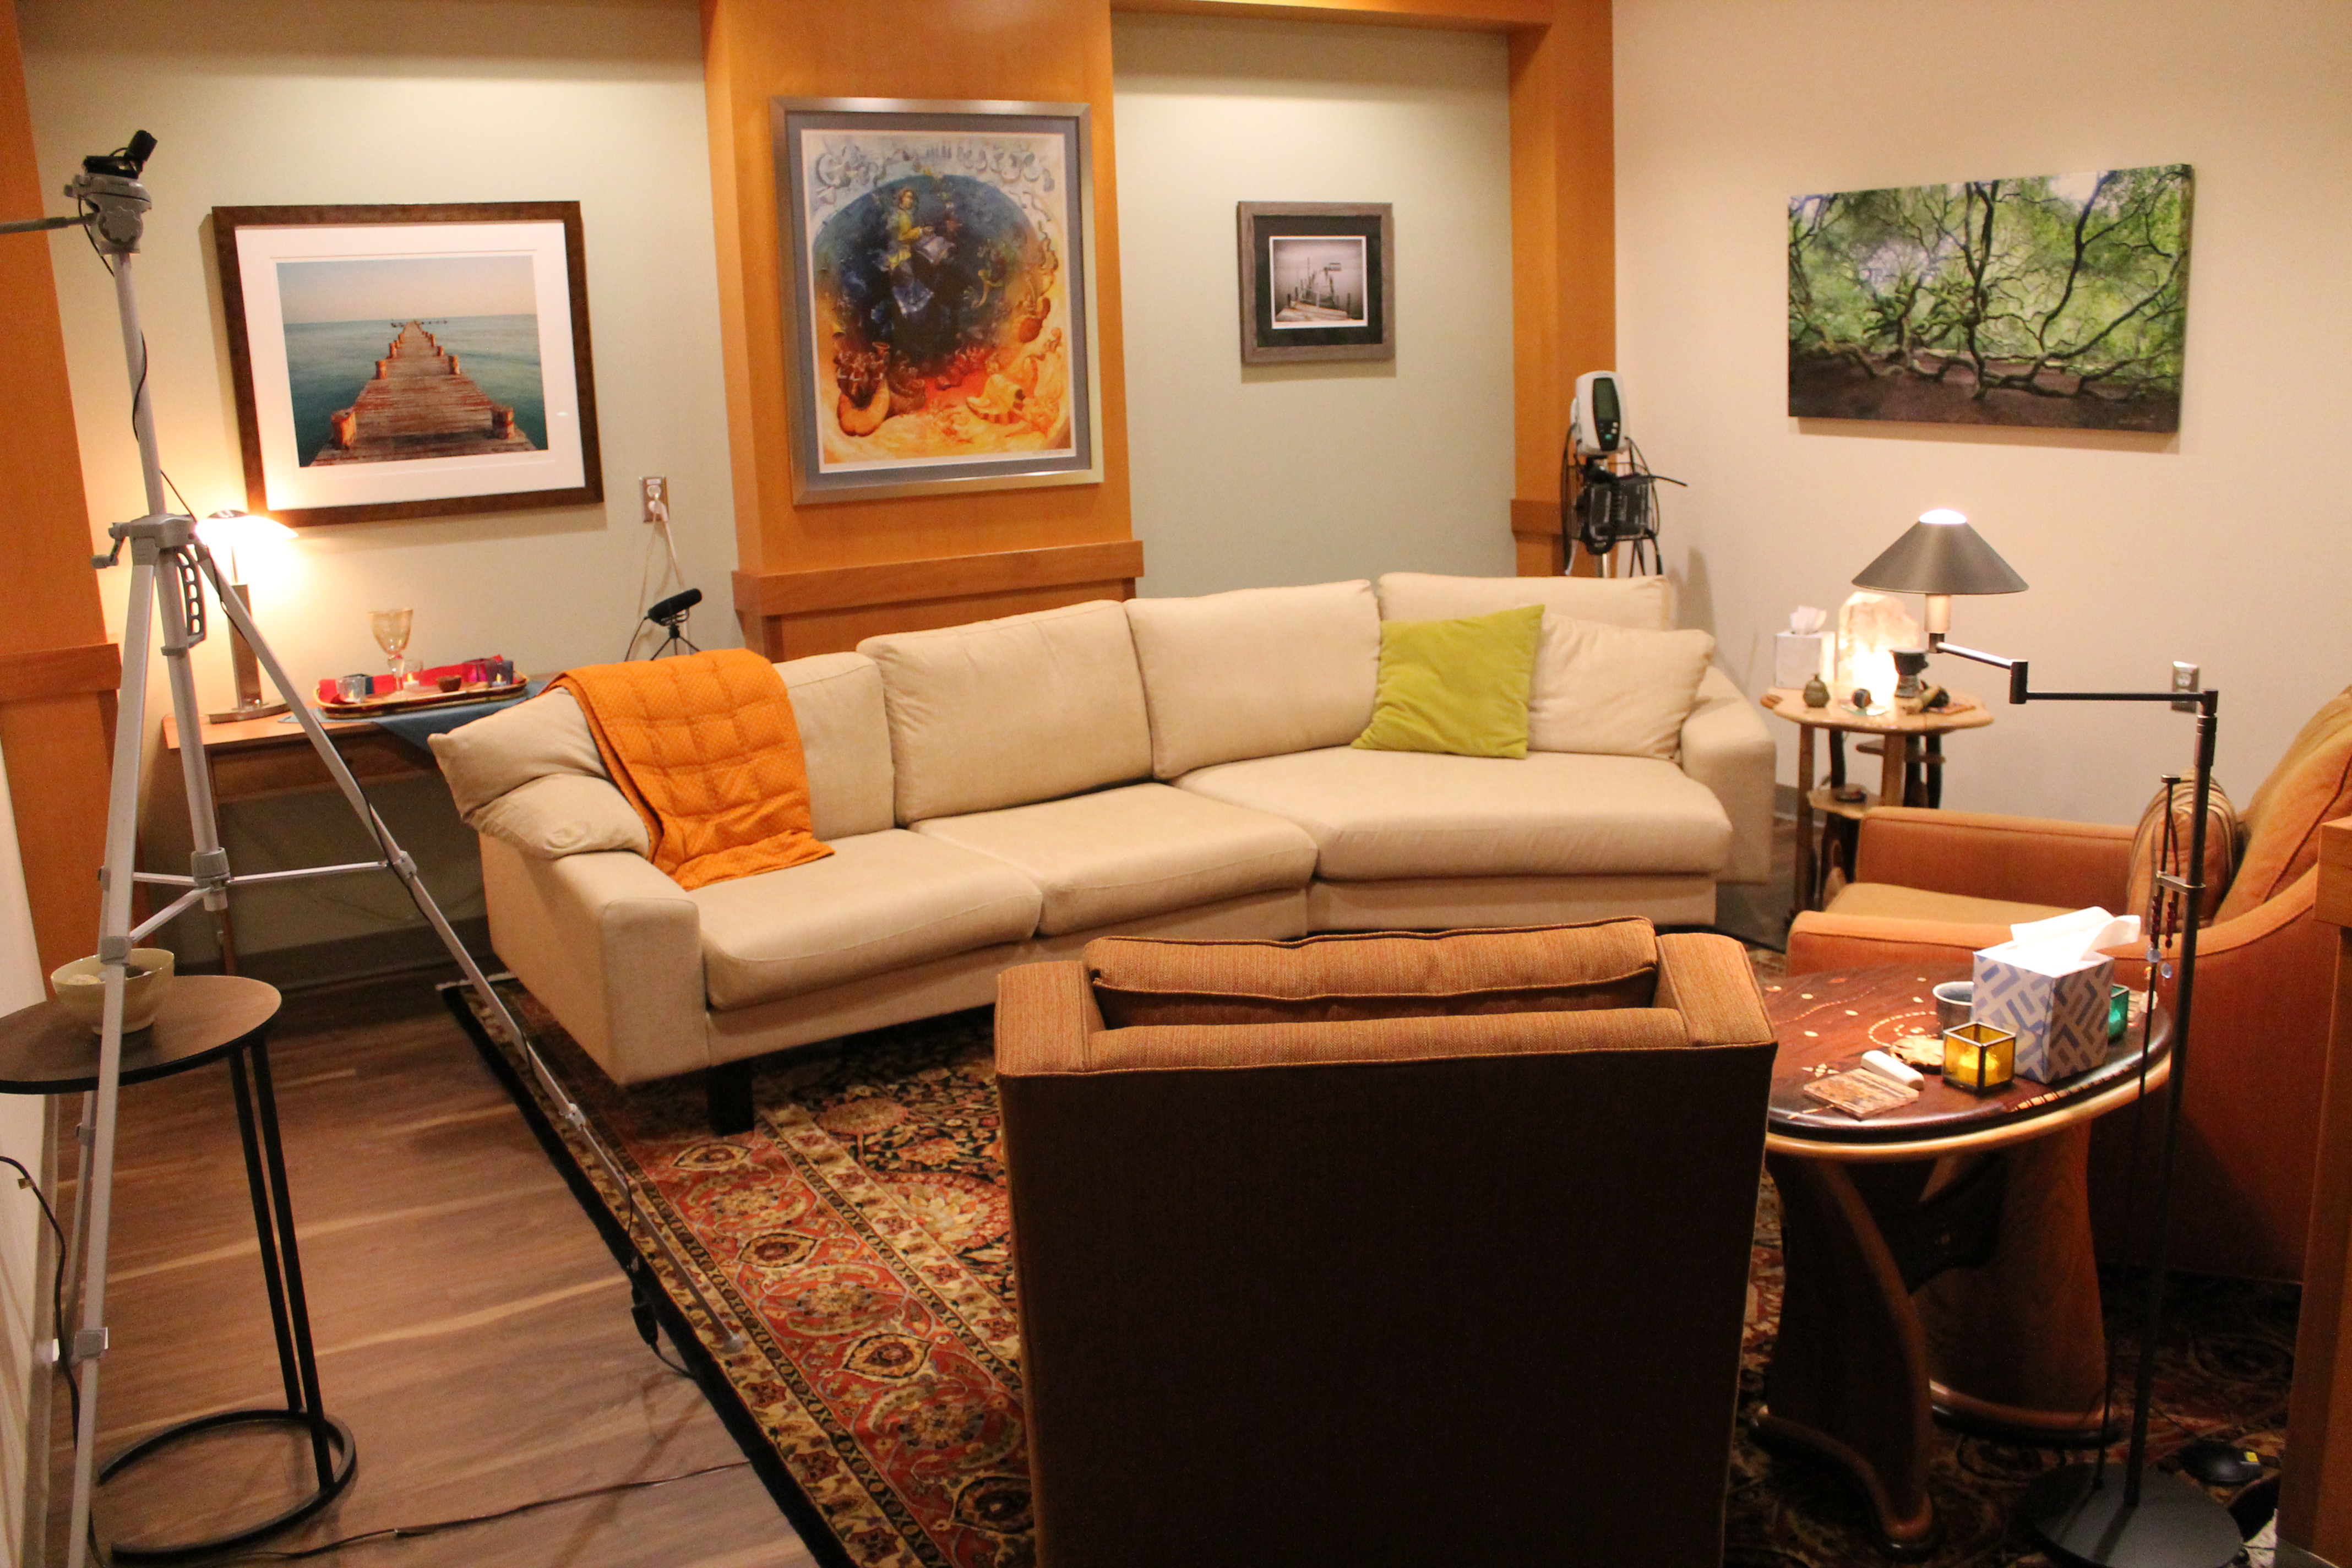 comfortable sofas, a rug, framed artwork, and low lighting enhance the psychoactive substances clinical therapy room